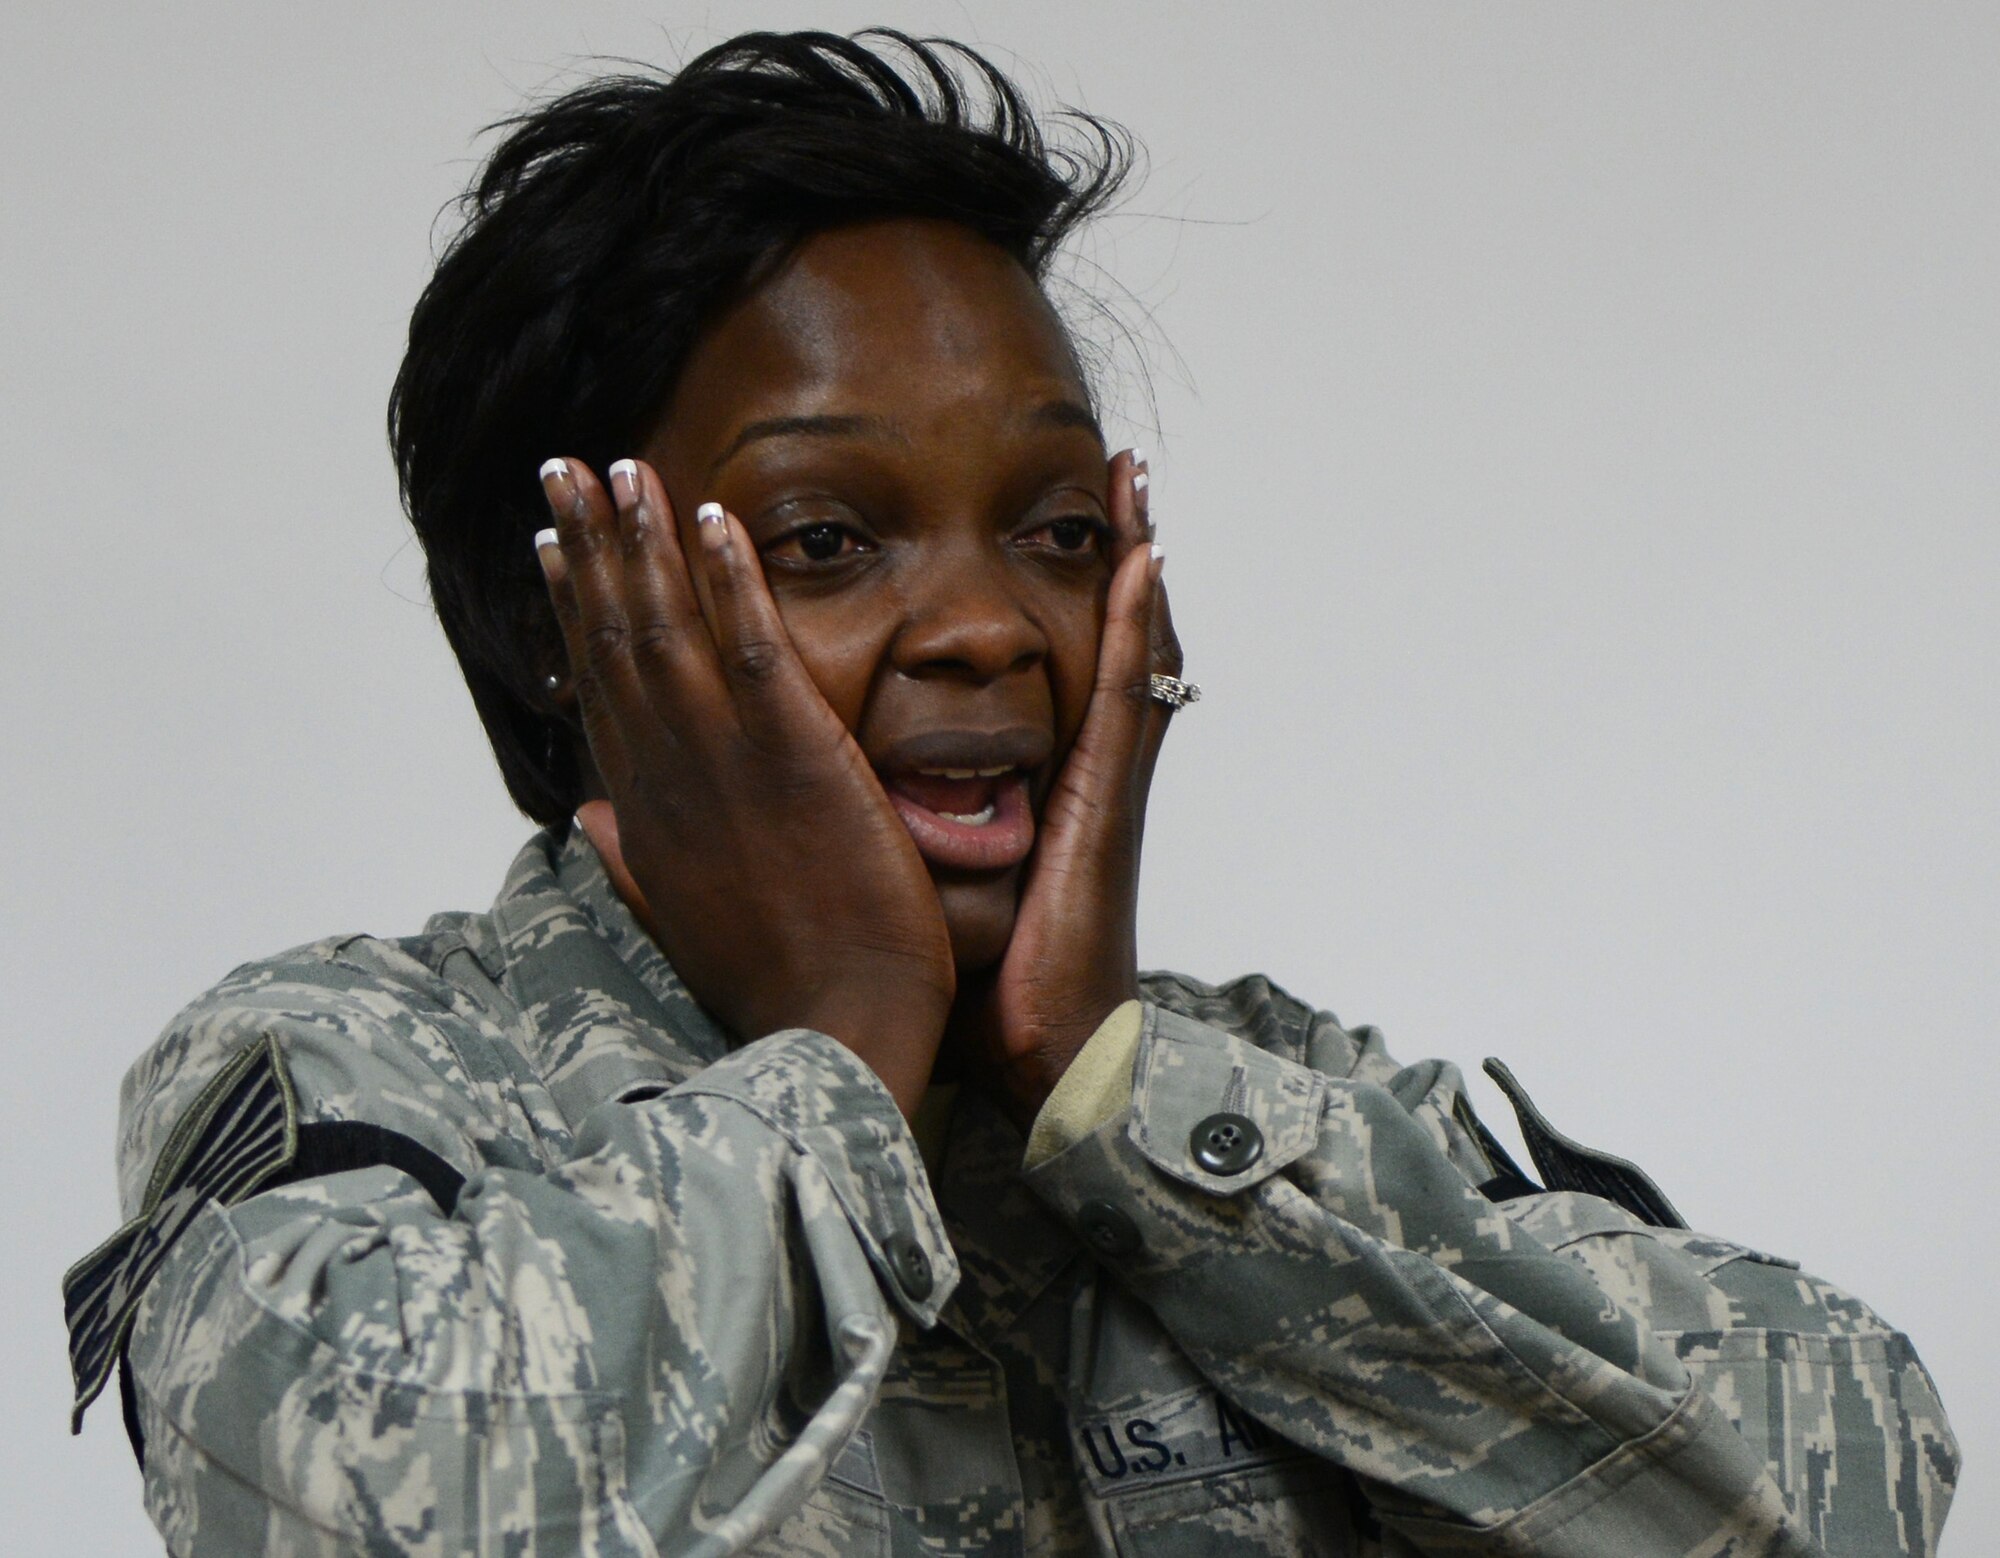 Tech. Sgt. Raven Taylor, 7th Medical Operations Squadron medical technician, shows excitement after being promoted through the Stripes for Exceptional Performers (STEP) program Dec. 22, 2014, at Dyess Air Force Base, Texas. STEP is a program that gives commanders the ability to promote Airmen to the rank of staff sergeant, technical sergeant and master sergeant if they exhibit exceptional potential. (U.S. Air Force photo by Airman 1st Class Kedesha Pennant/Released)